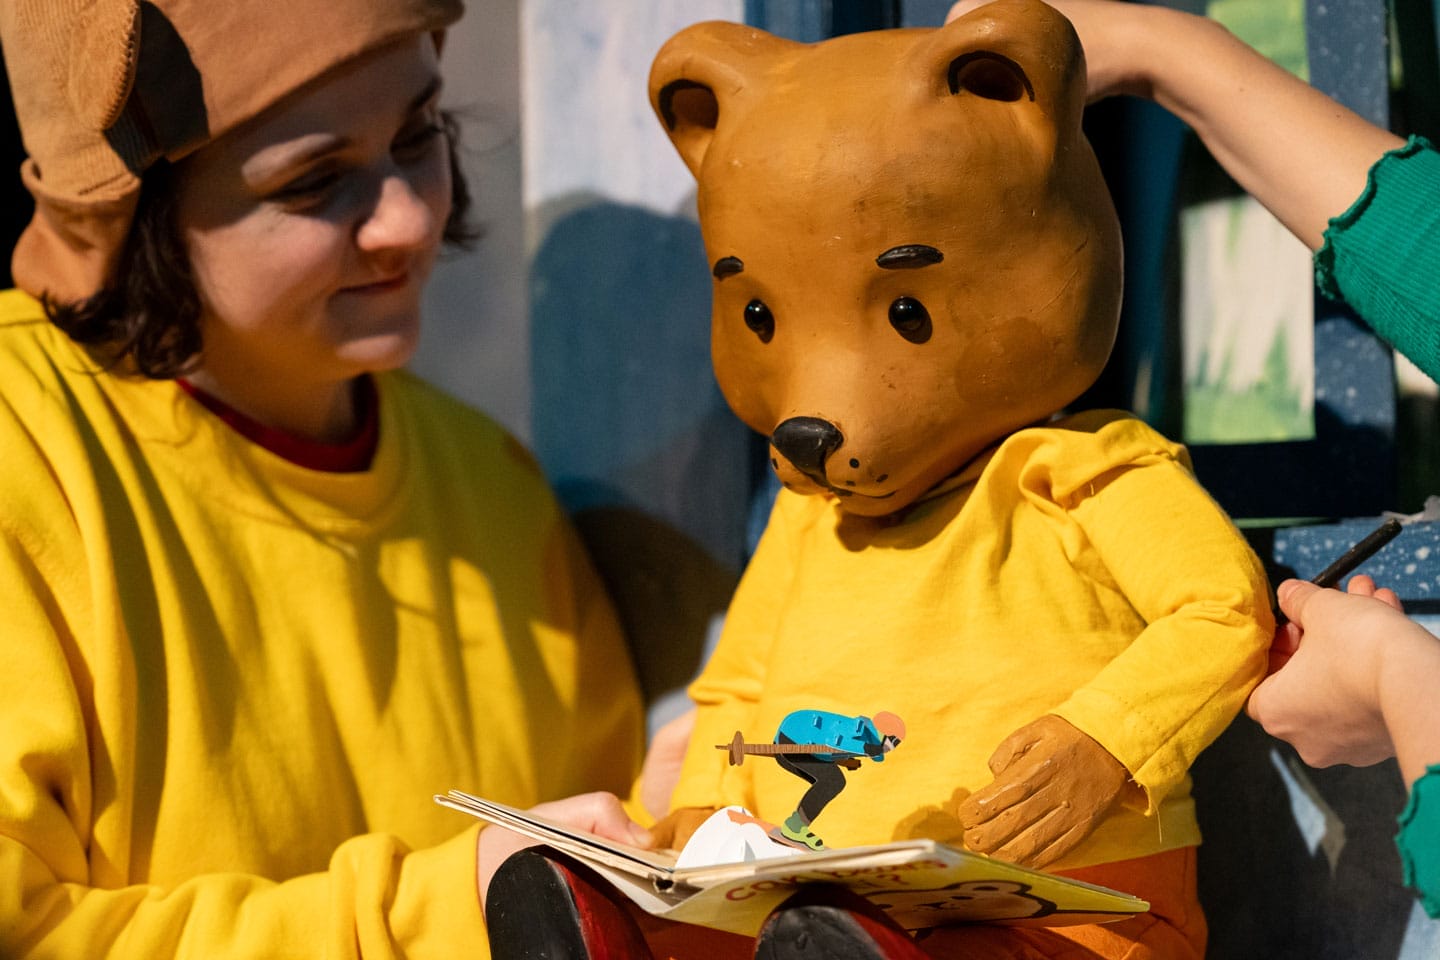 A close up of a bear puppet wearing a yellow jumper. Next to the bear, a puppeteer is wearing the same outfit.